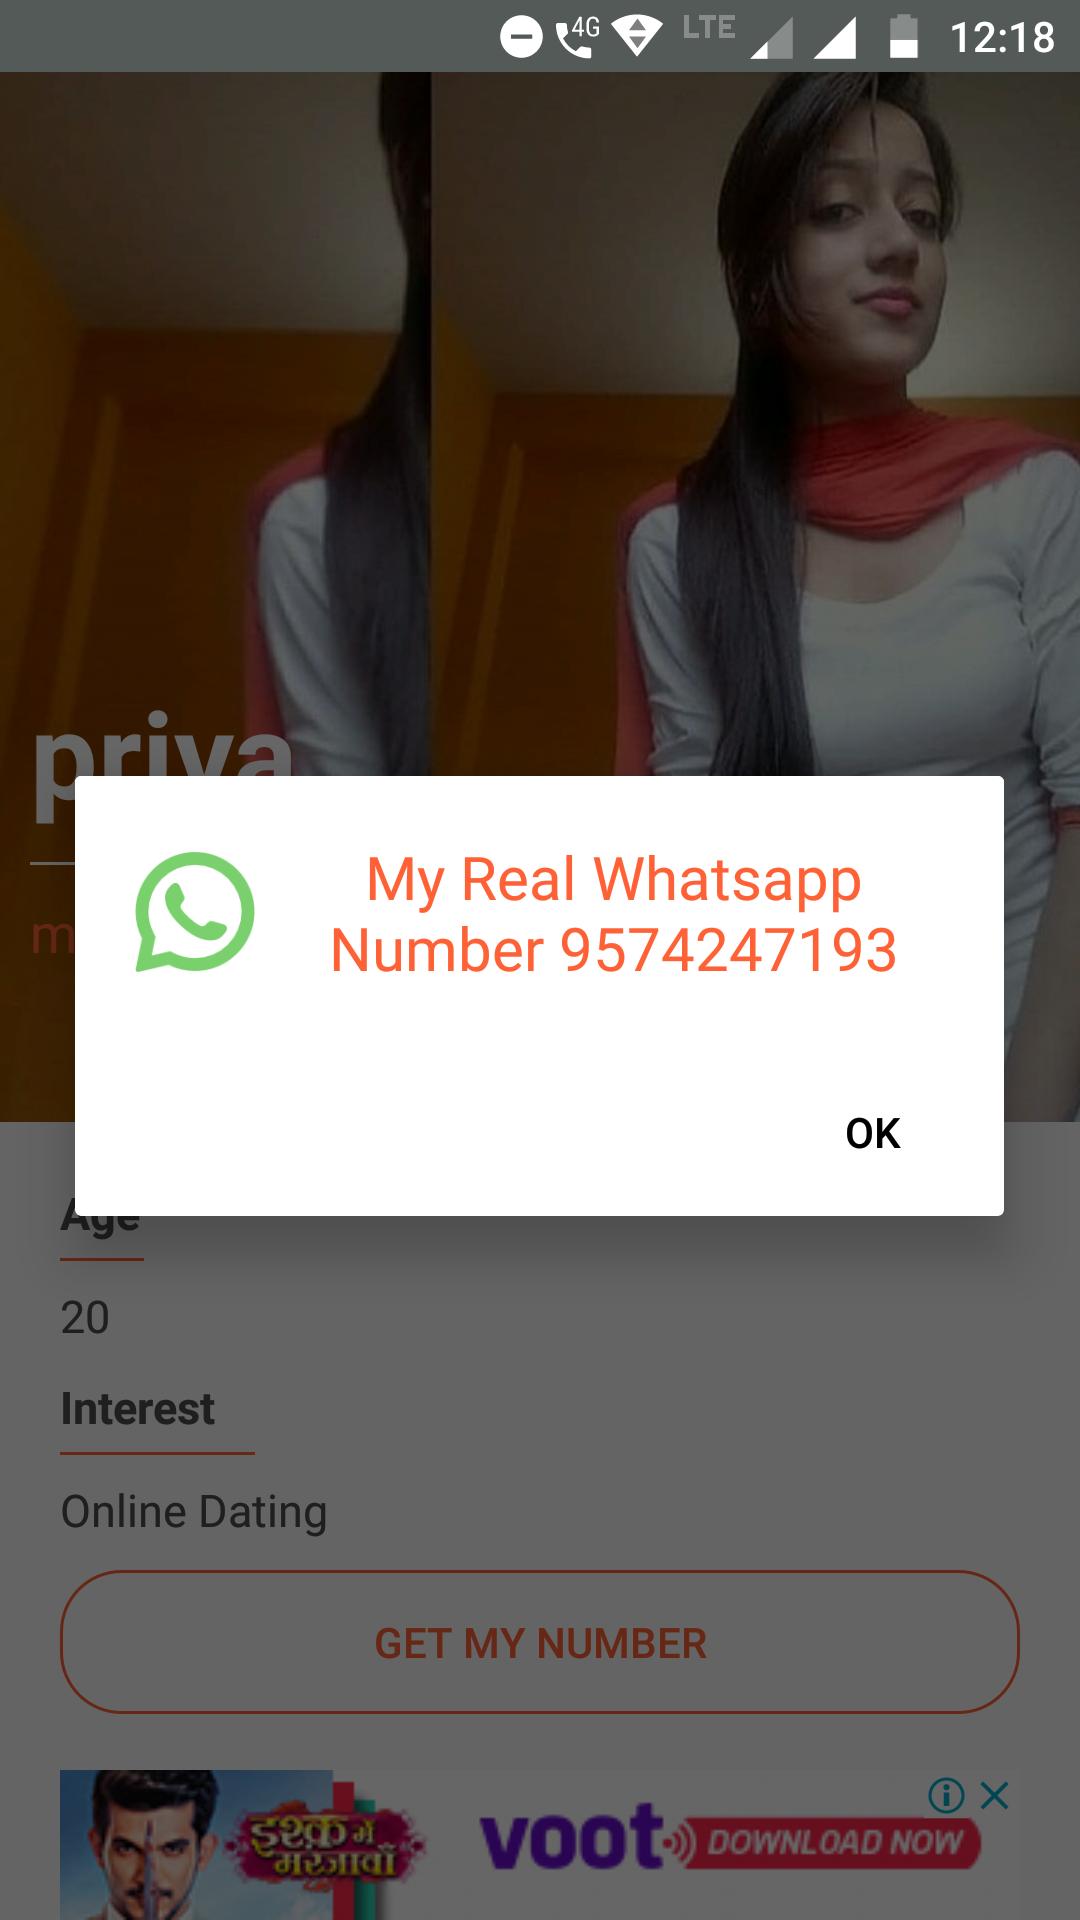 Whatsapp numbers for dating